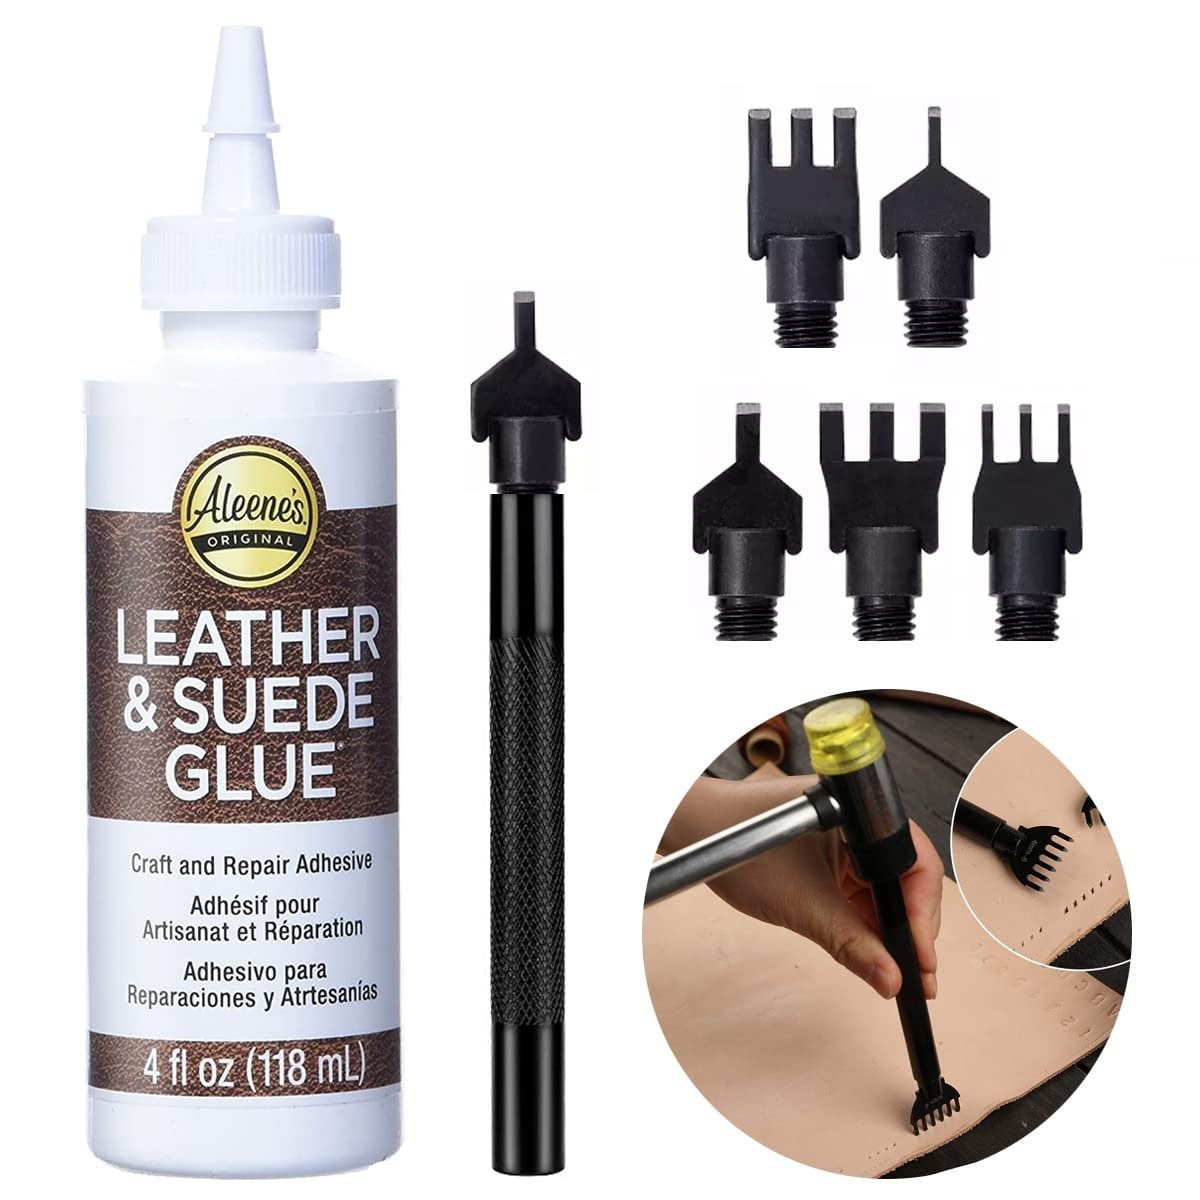 Colle pour Cuir Leather & suede glue d'Aleene's (118 ml)